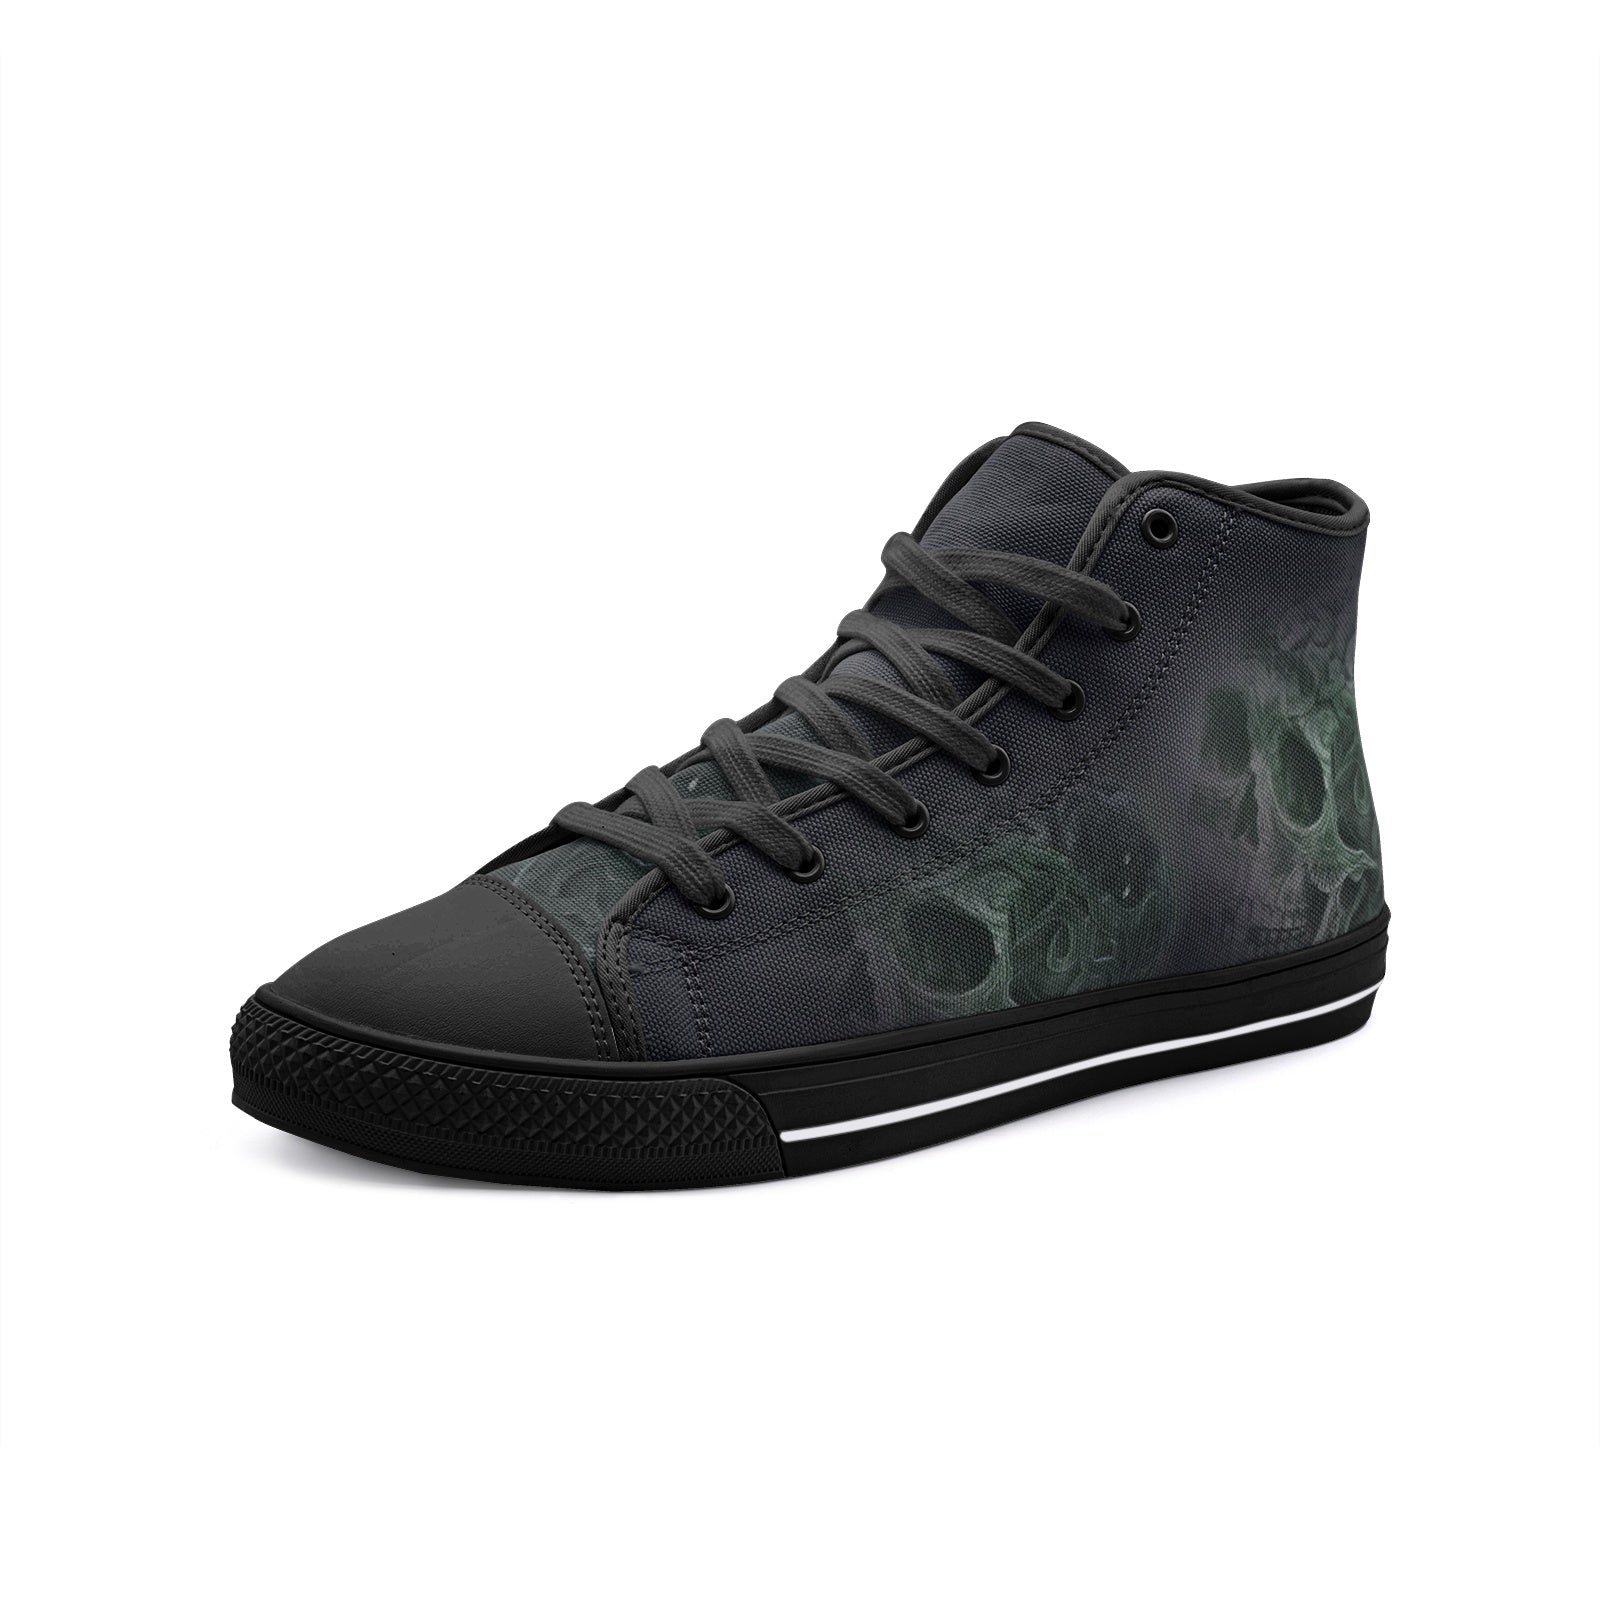 Double Skull Unisex High Top Canvas Shoes